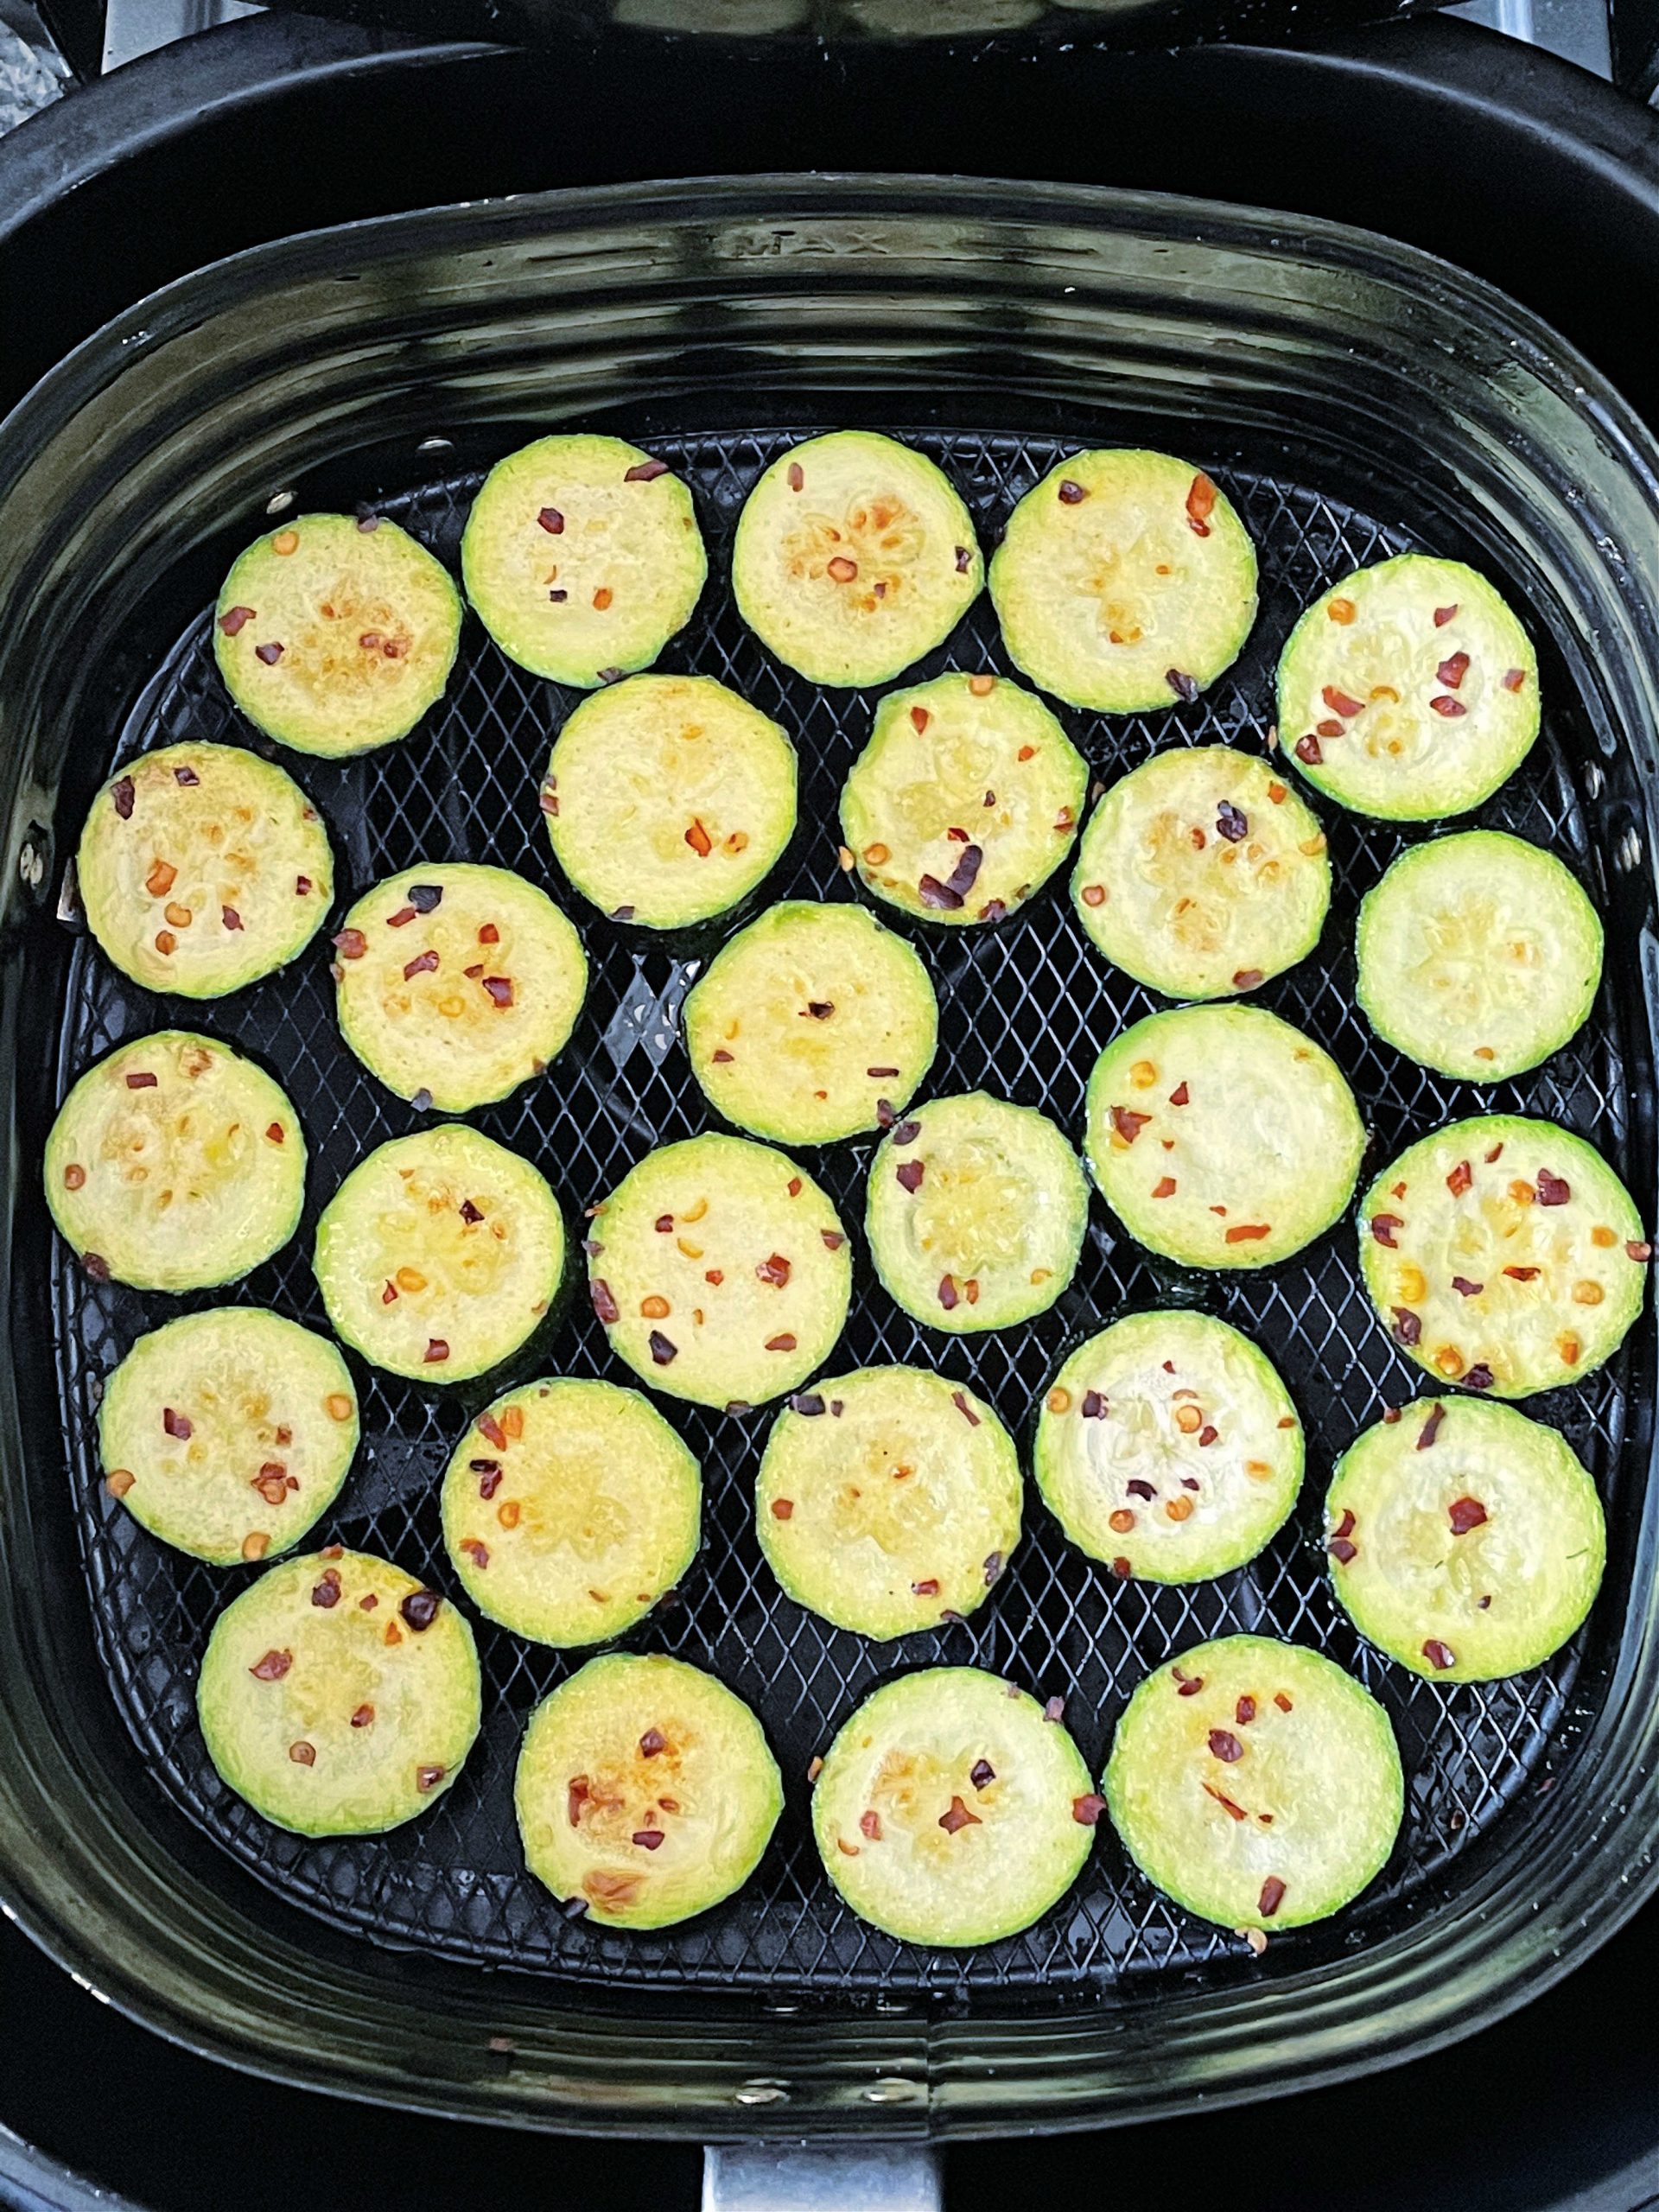 zucchini slices in the air fryer basket